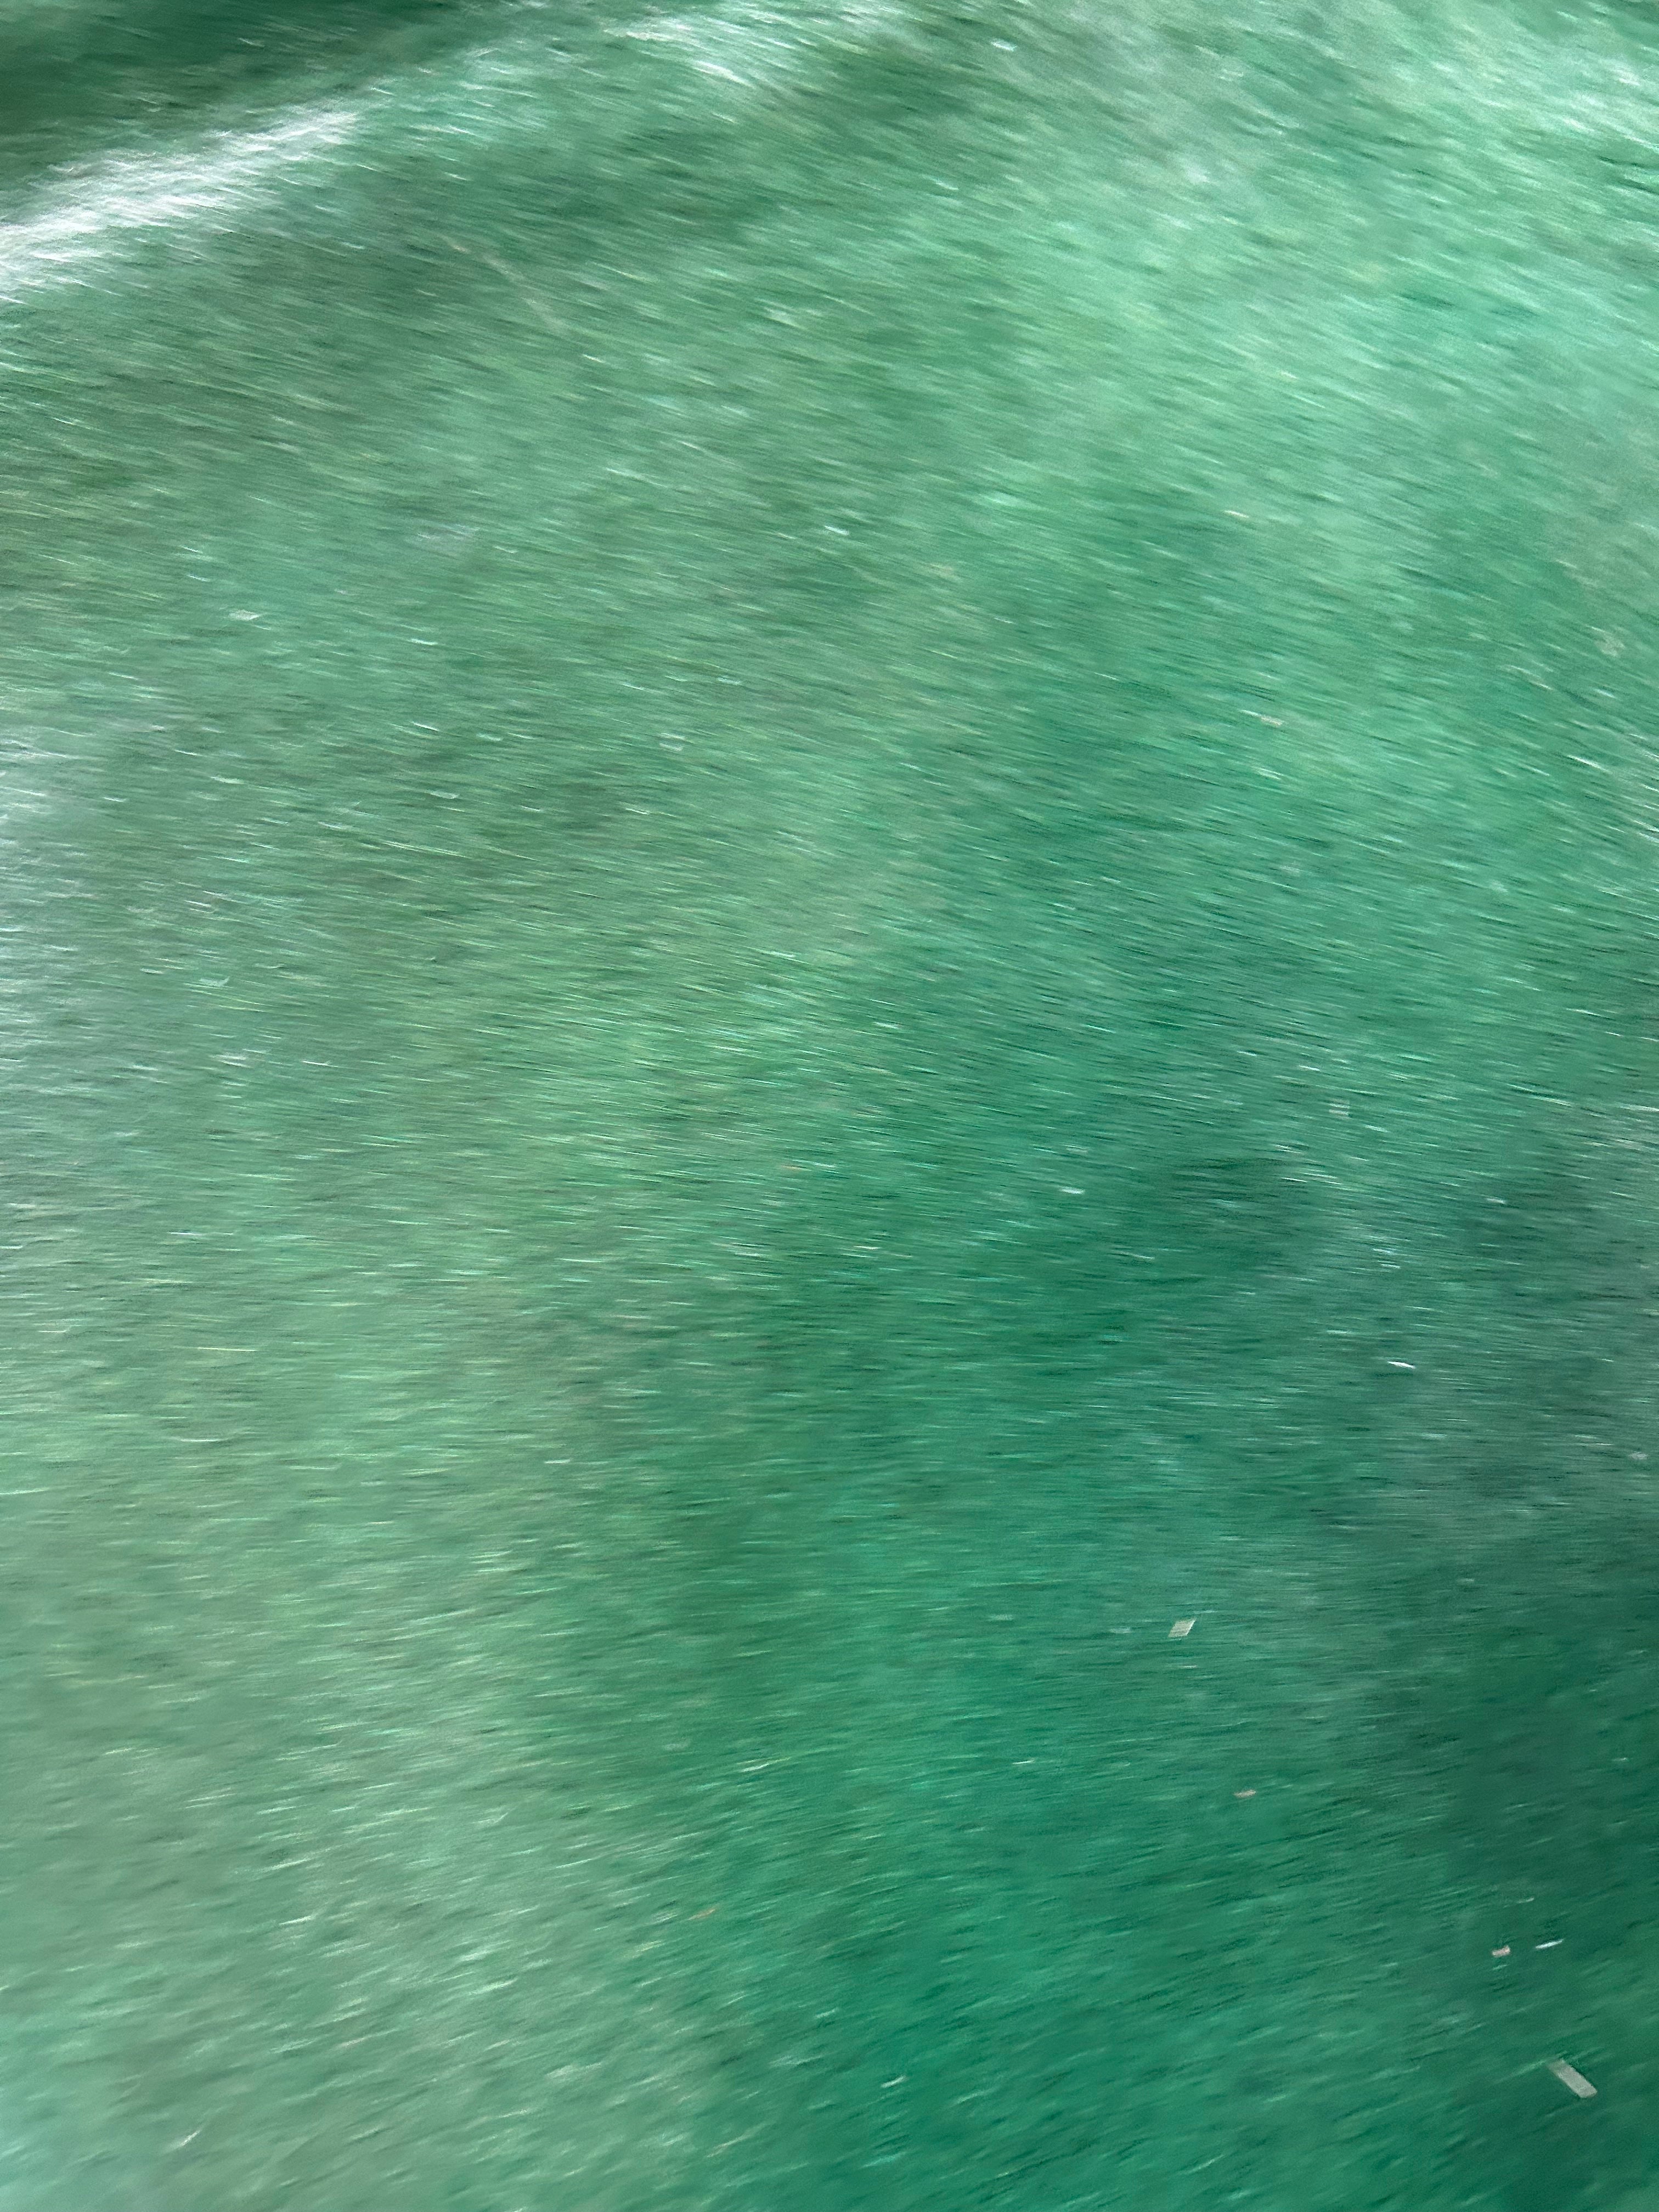 Dyed Emerald Green Cowhide Rug Size: 7x7 feet D-031